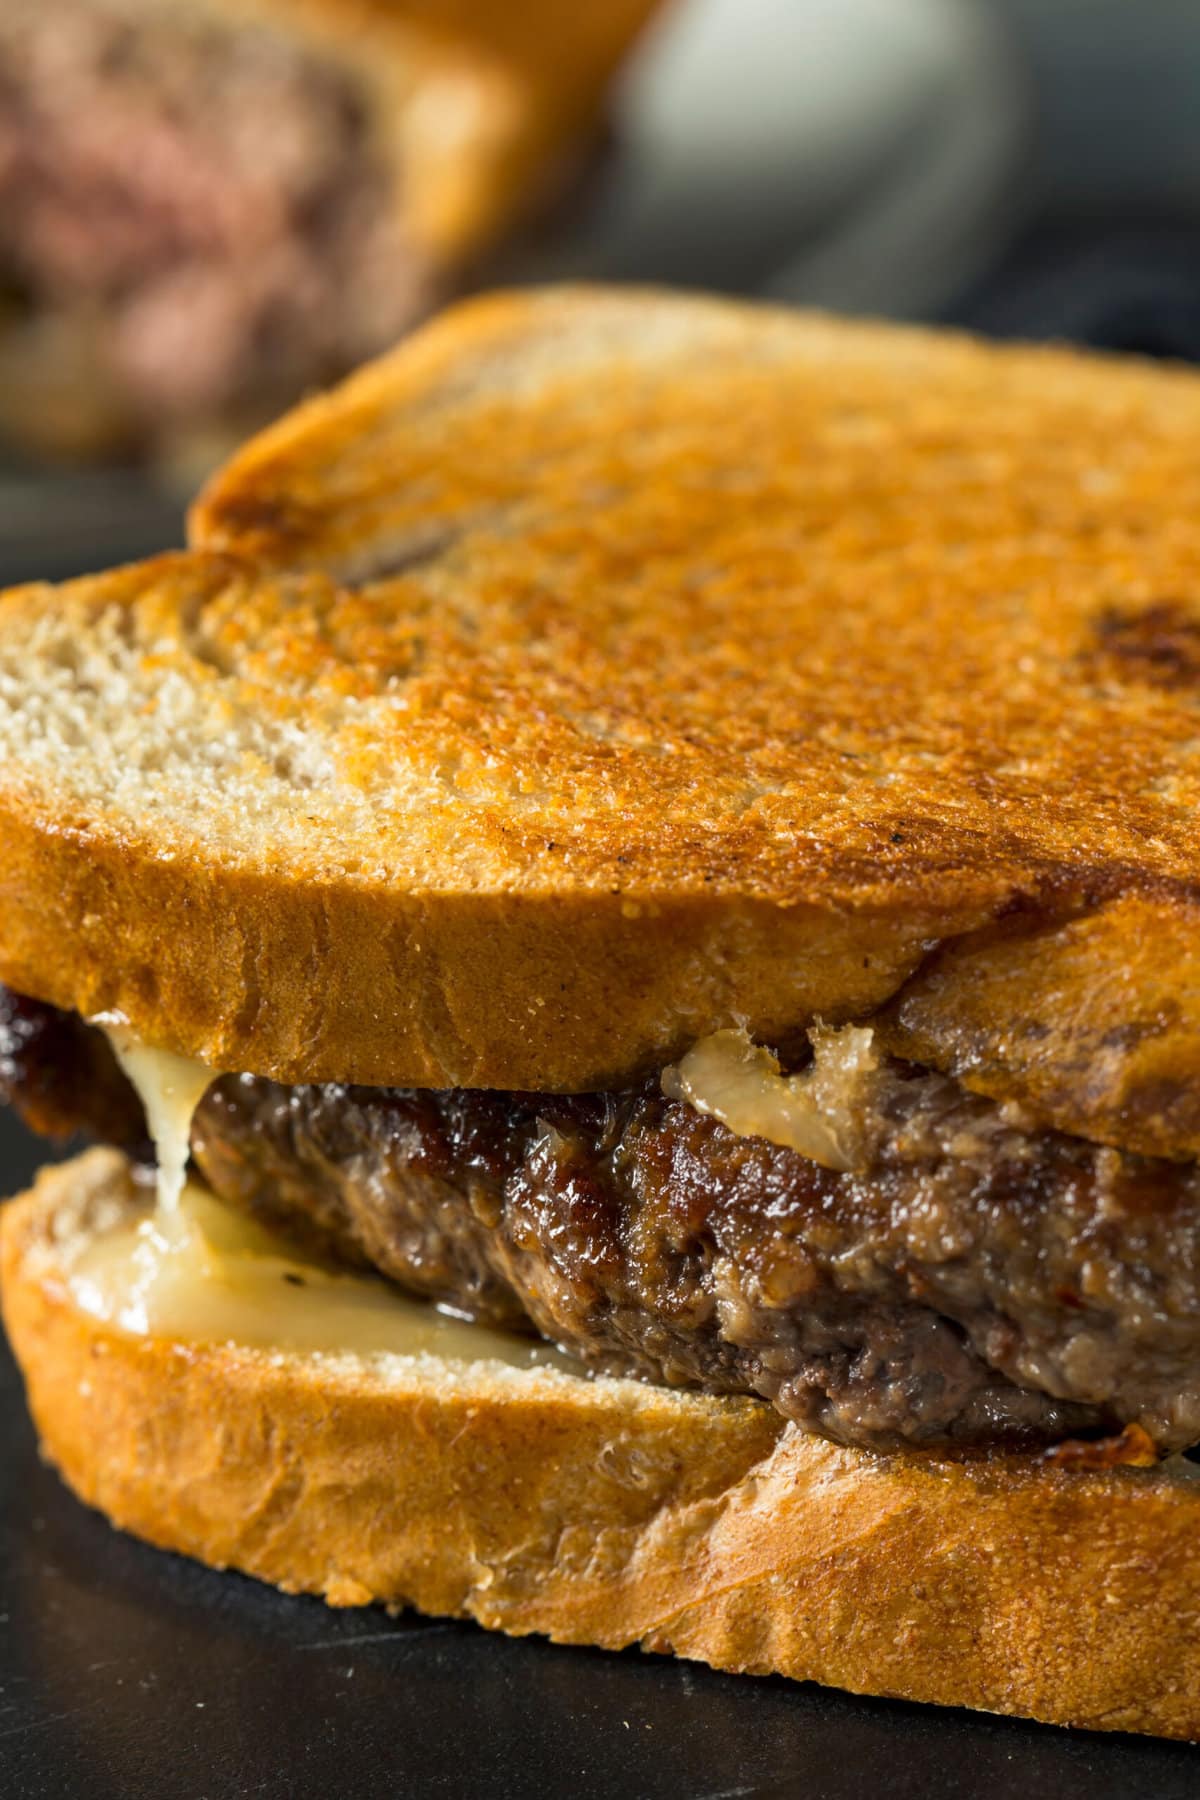 Closeup of Sandwich With Thick Beef Patty and Melting Cheese